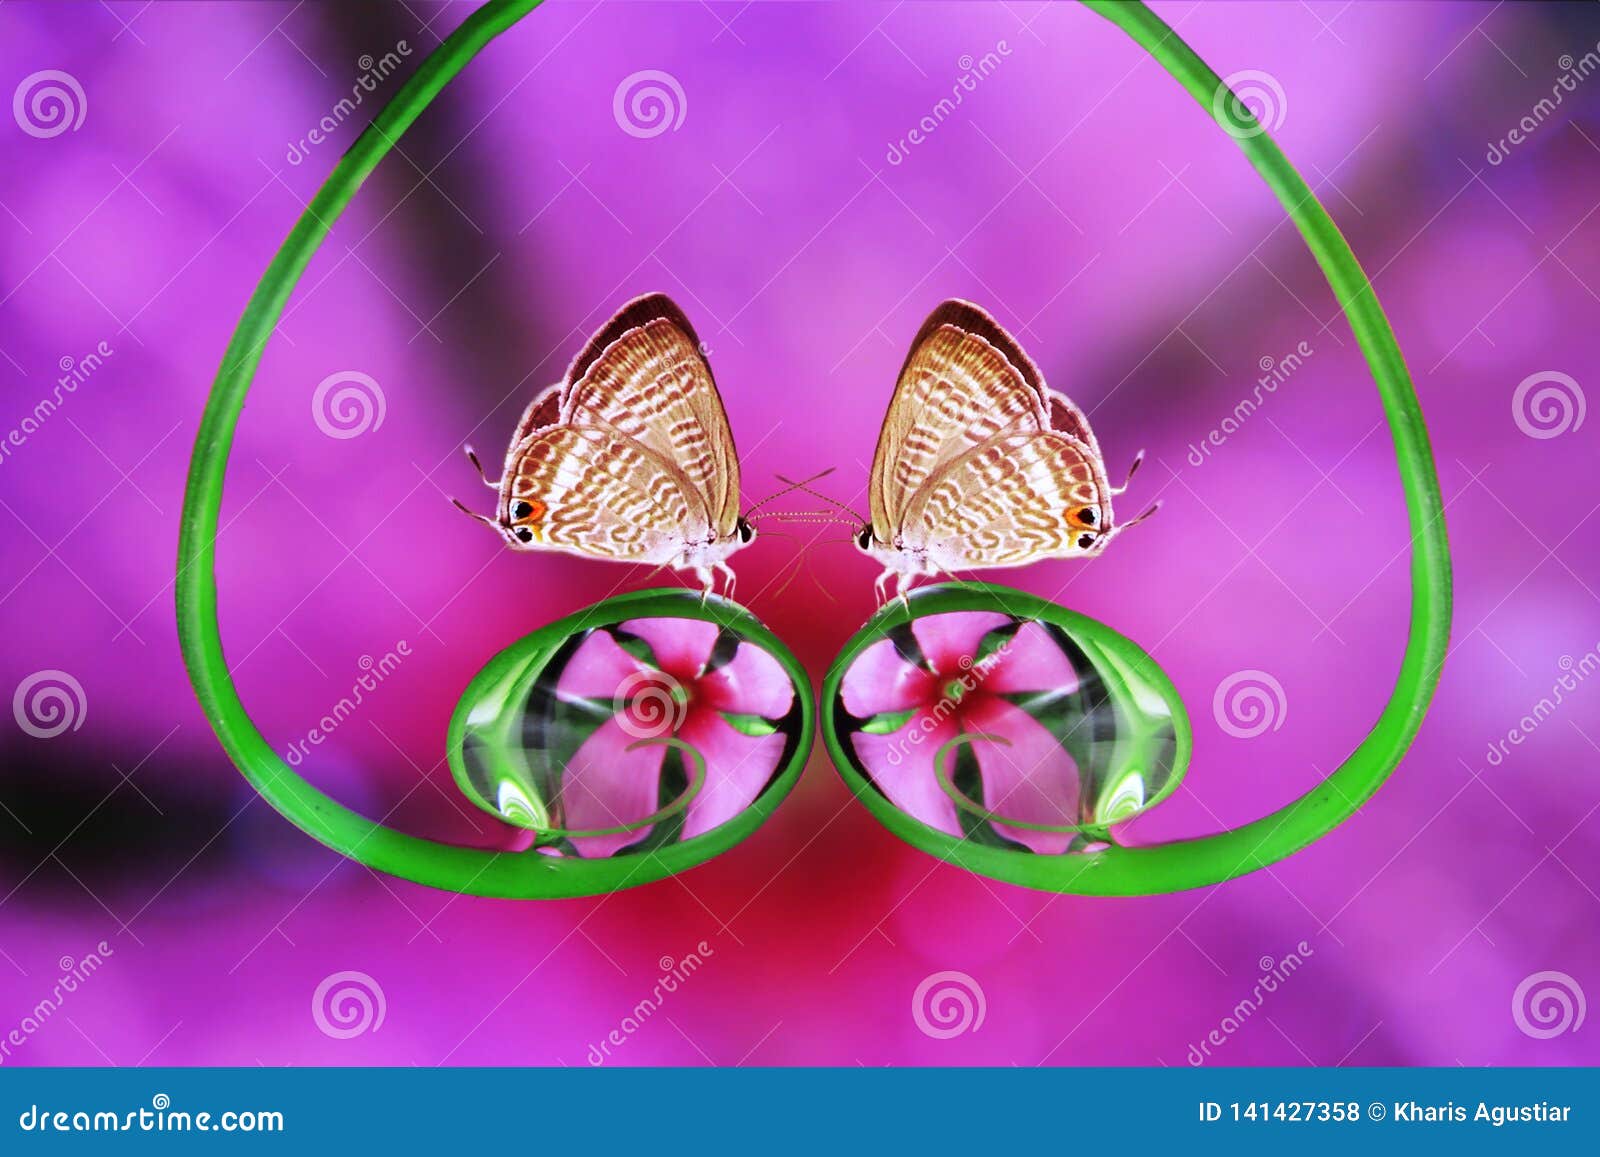 Romance Love Butterfly Flower Beautiful Color Stock Photo - Image ...